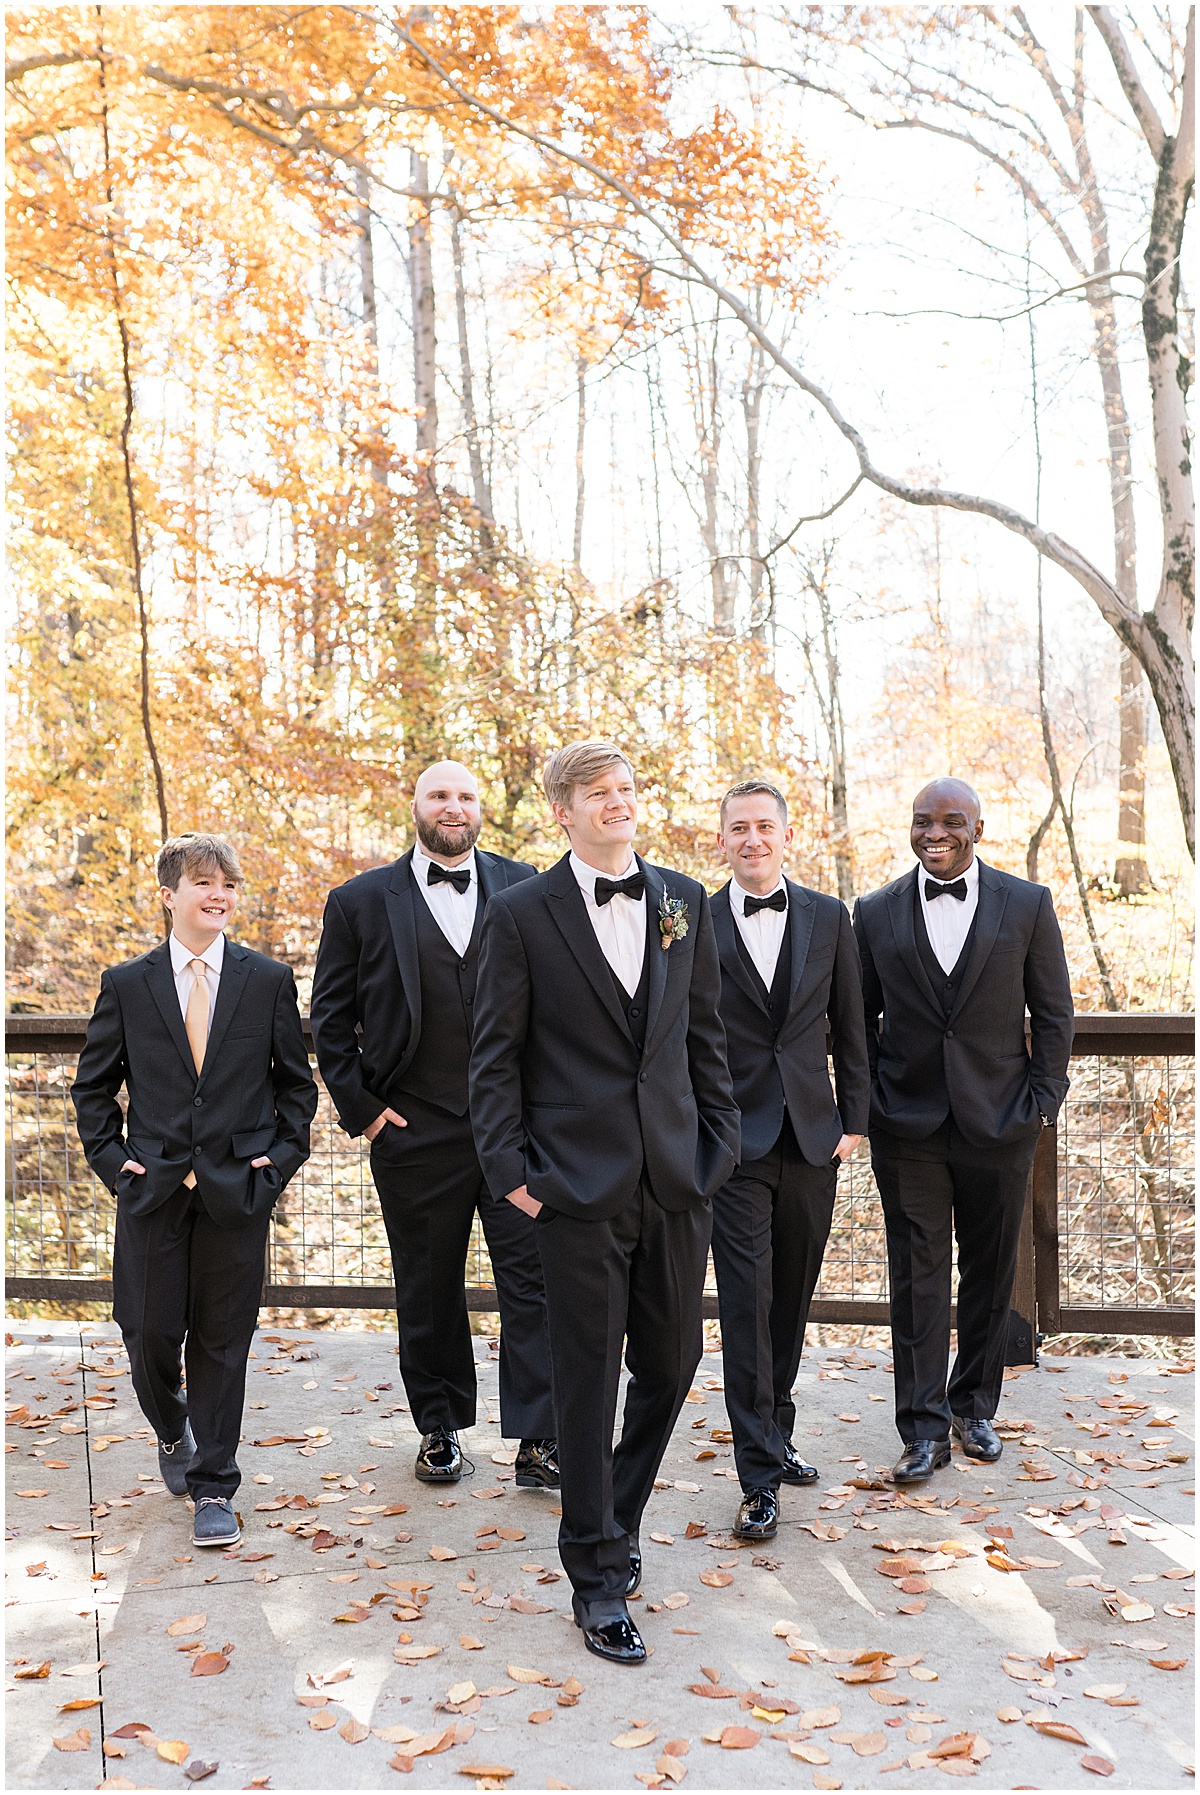 Groomsmen walk in fall leaves for fall wedding at 3 Fat Labs in Greencastle, Indiana